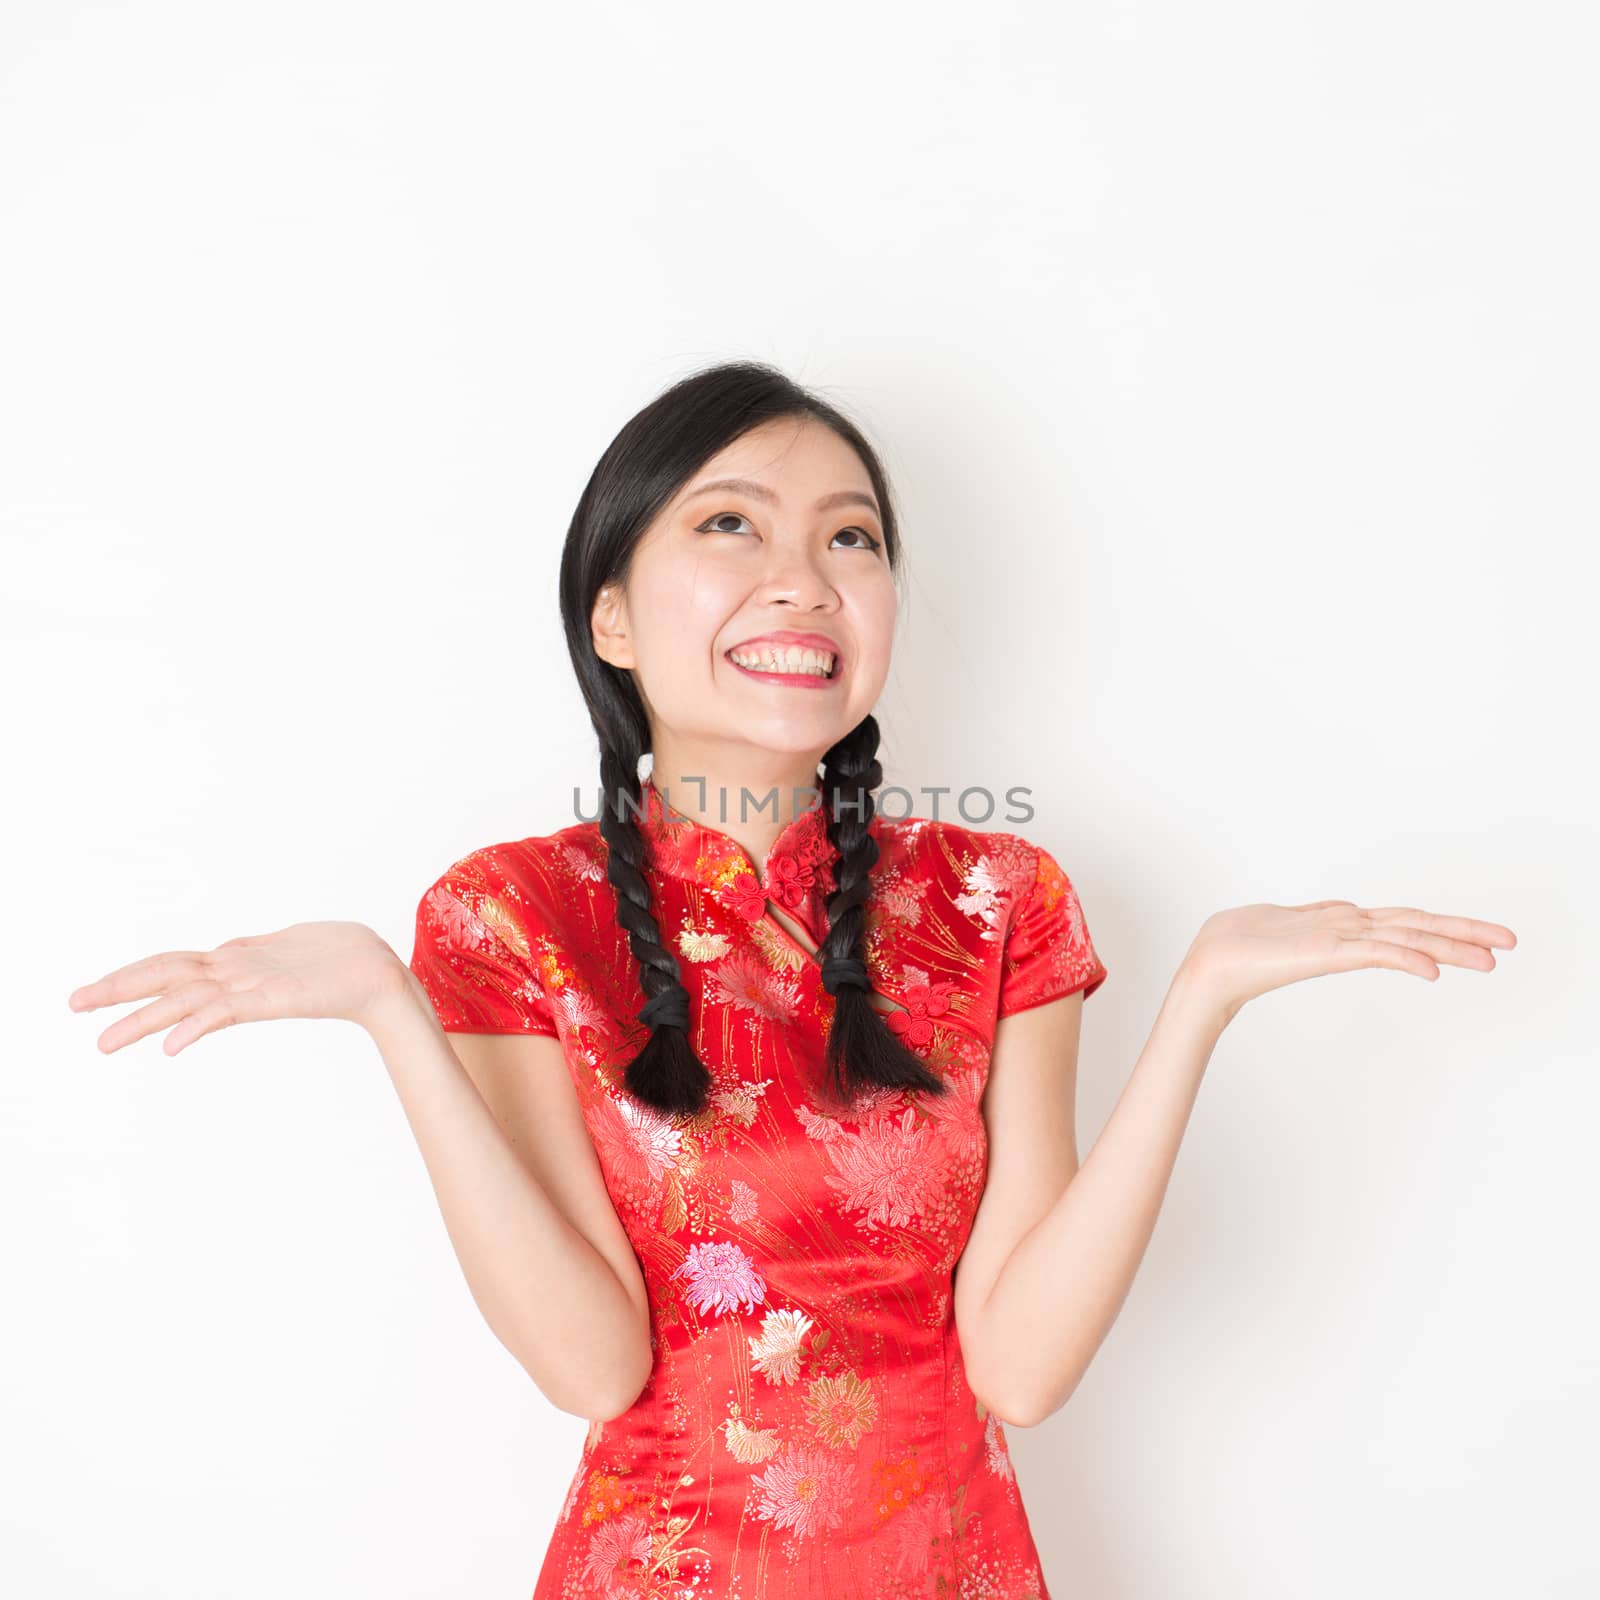 Portrait of surprise young Asian woman in traditional qipao dress with hand opened and looking up, celebrating Chinese Lunar New Year or spring festival, standing on plain background.